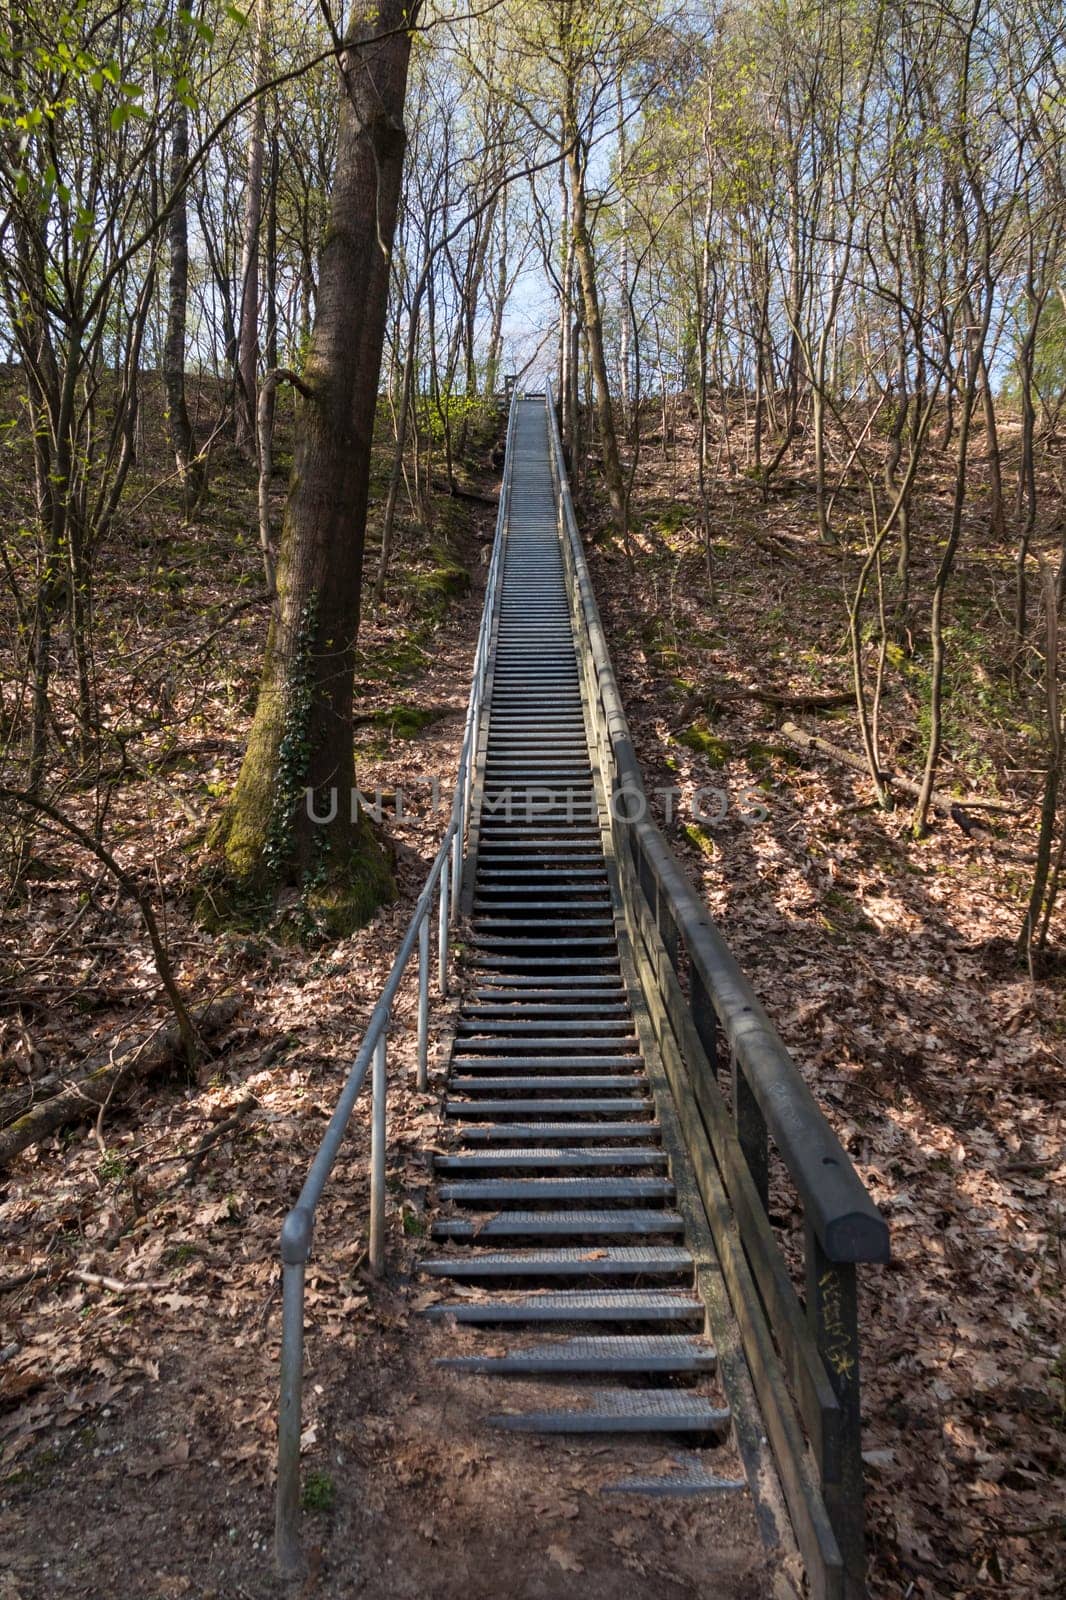 very high metal stairs in the nature reserve by compuinfoto